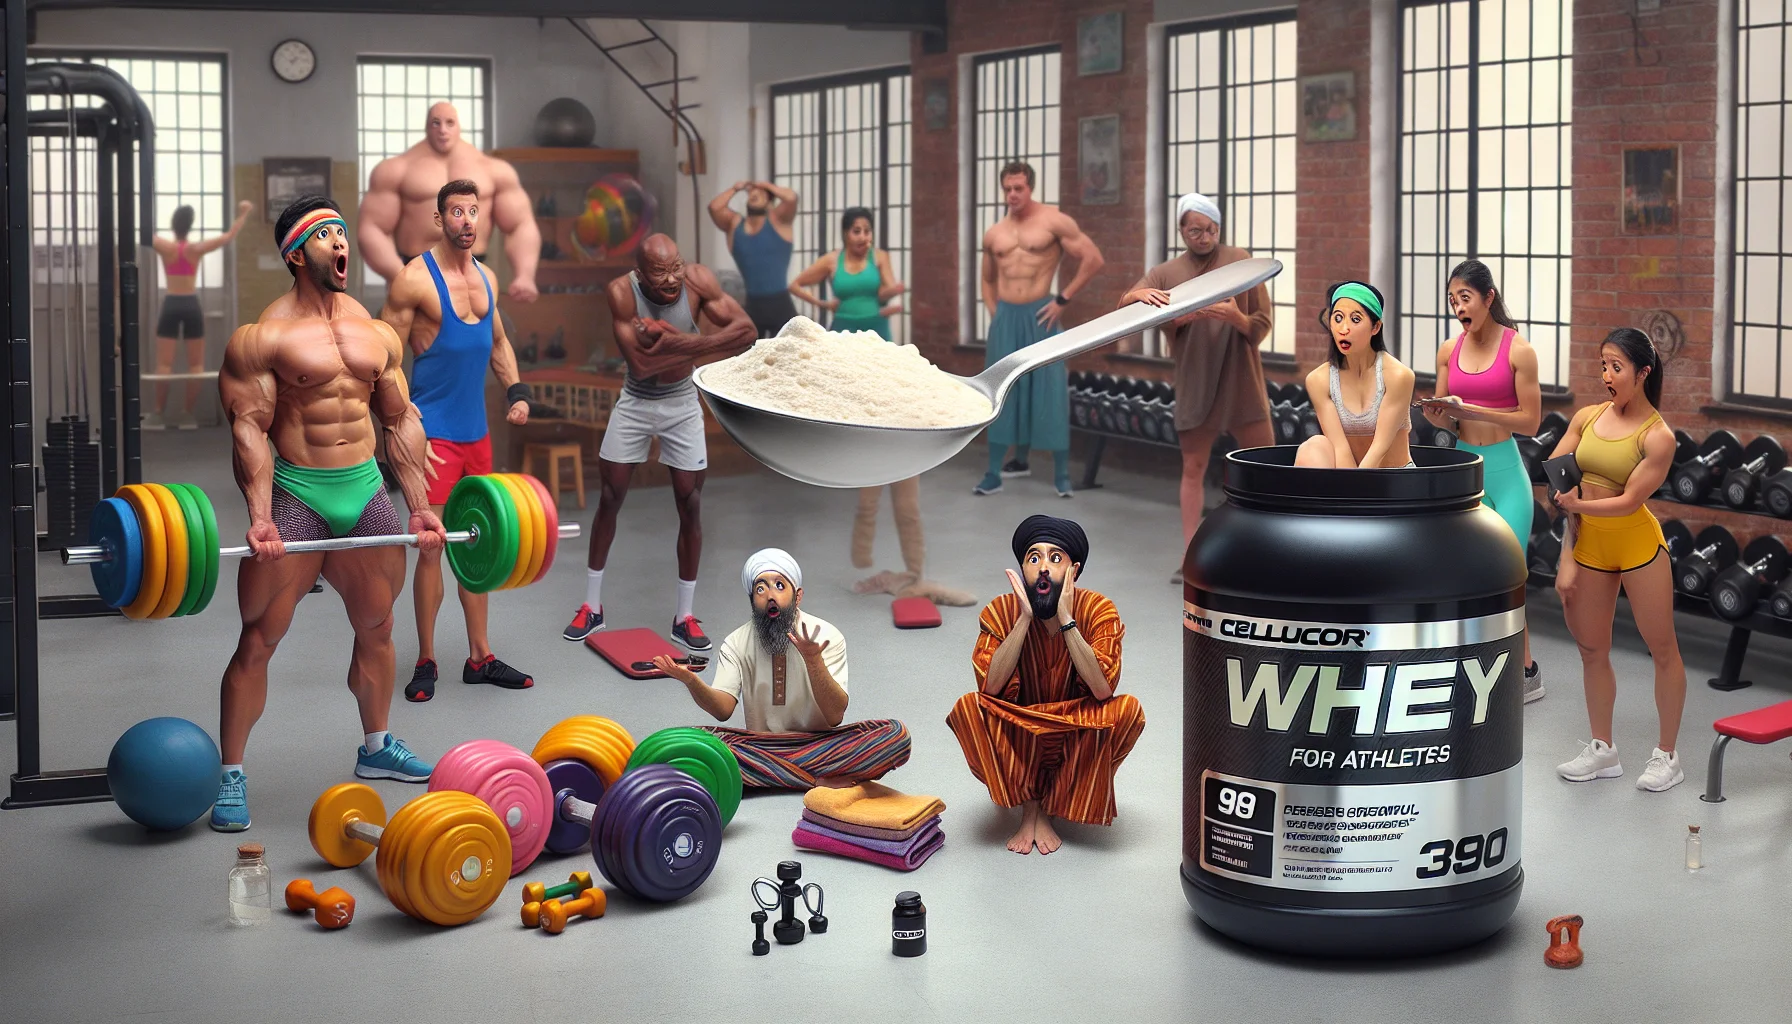 Imagine a humorous scene centered around Cellucor whey protein for athletes. Visualize a sports setting, perhaps a gym with various workout equipment. In the foreground, place a container of Cellucor whey with a comically oversized scoop. Nearby, some colourful workout gear is scattered, as if hastily discarded. Perhaps a barbell precariously placed on top of a stack of dumbbells. In the background, a diverse group of people - a Caucasian male weightlifter, a Hispanic female yoga practitioner, a Middle-Eastern male gymnast and an eager South Asian female who looks like she's just started her fitness journey - all look astounded, their wide-eyed expressions directed at the gigantic scoop of protein.